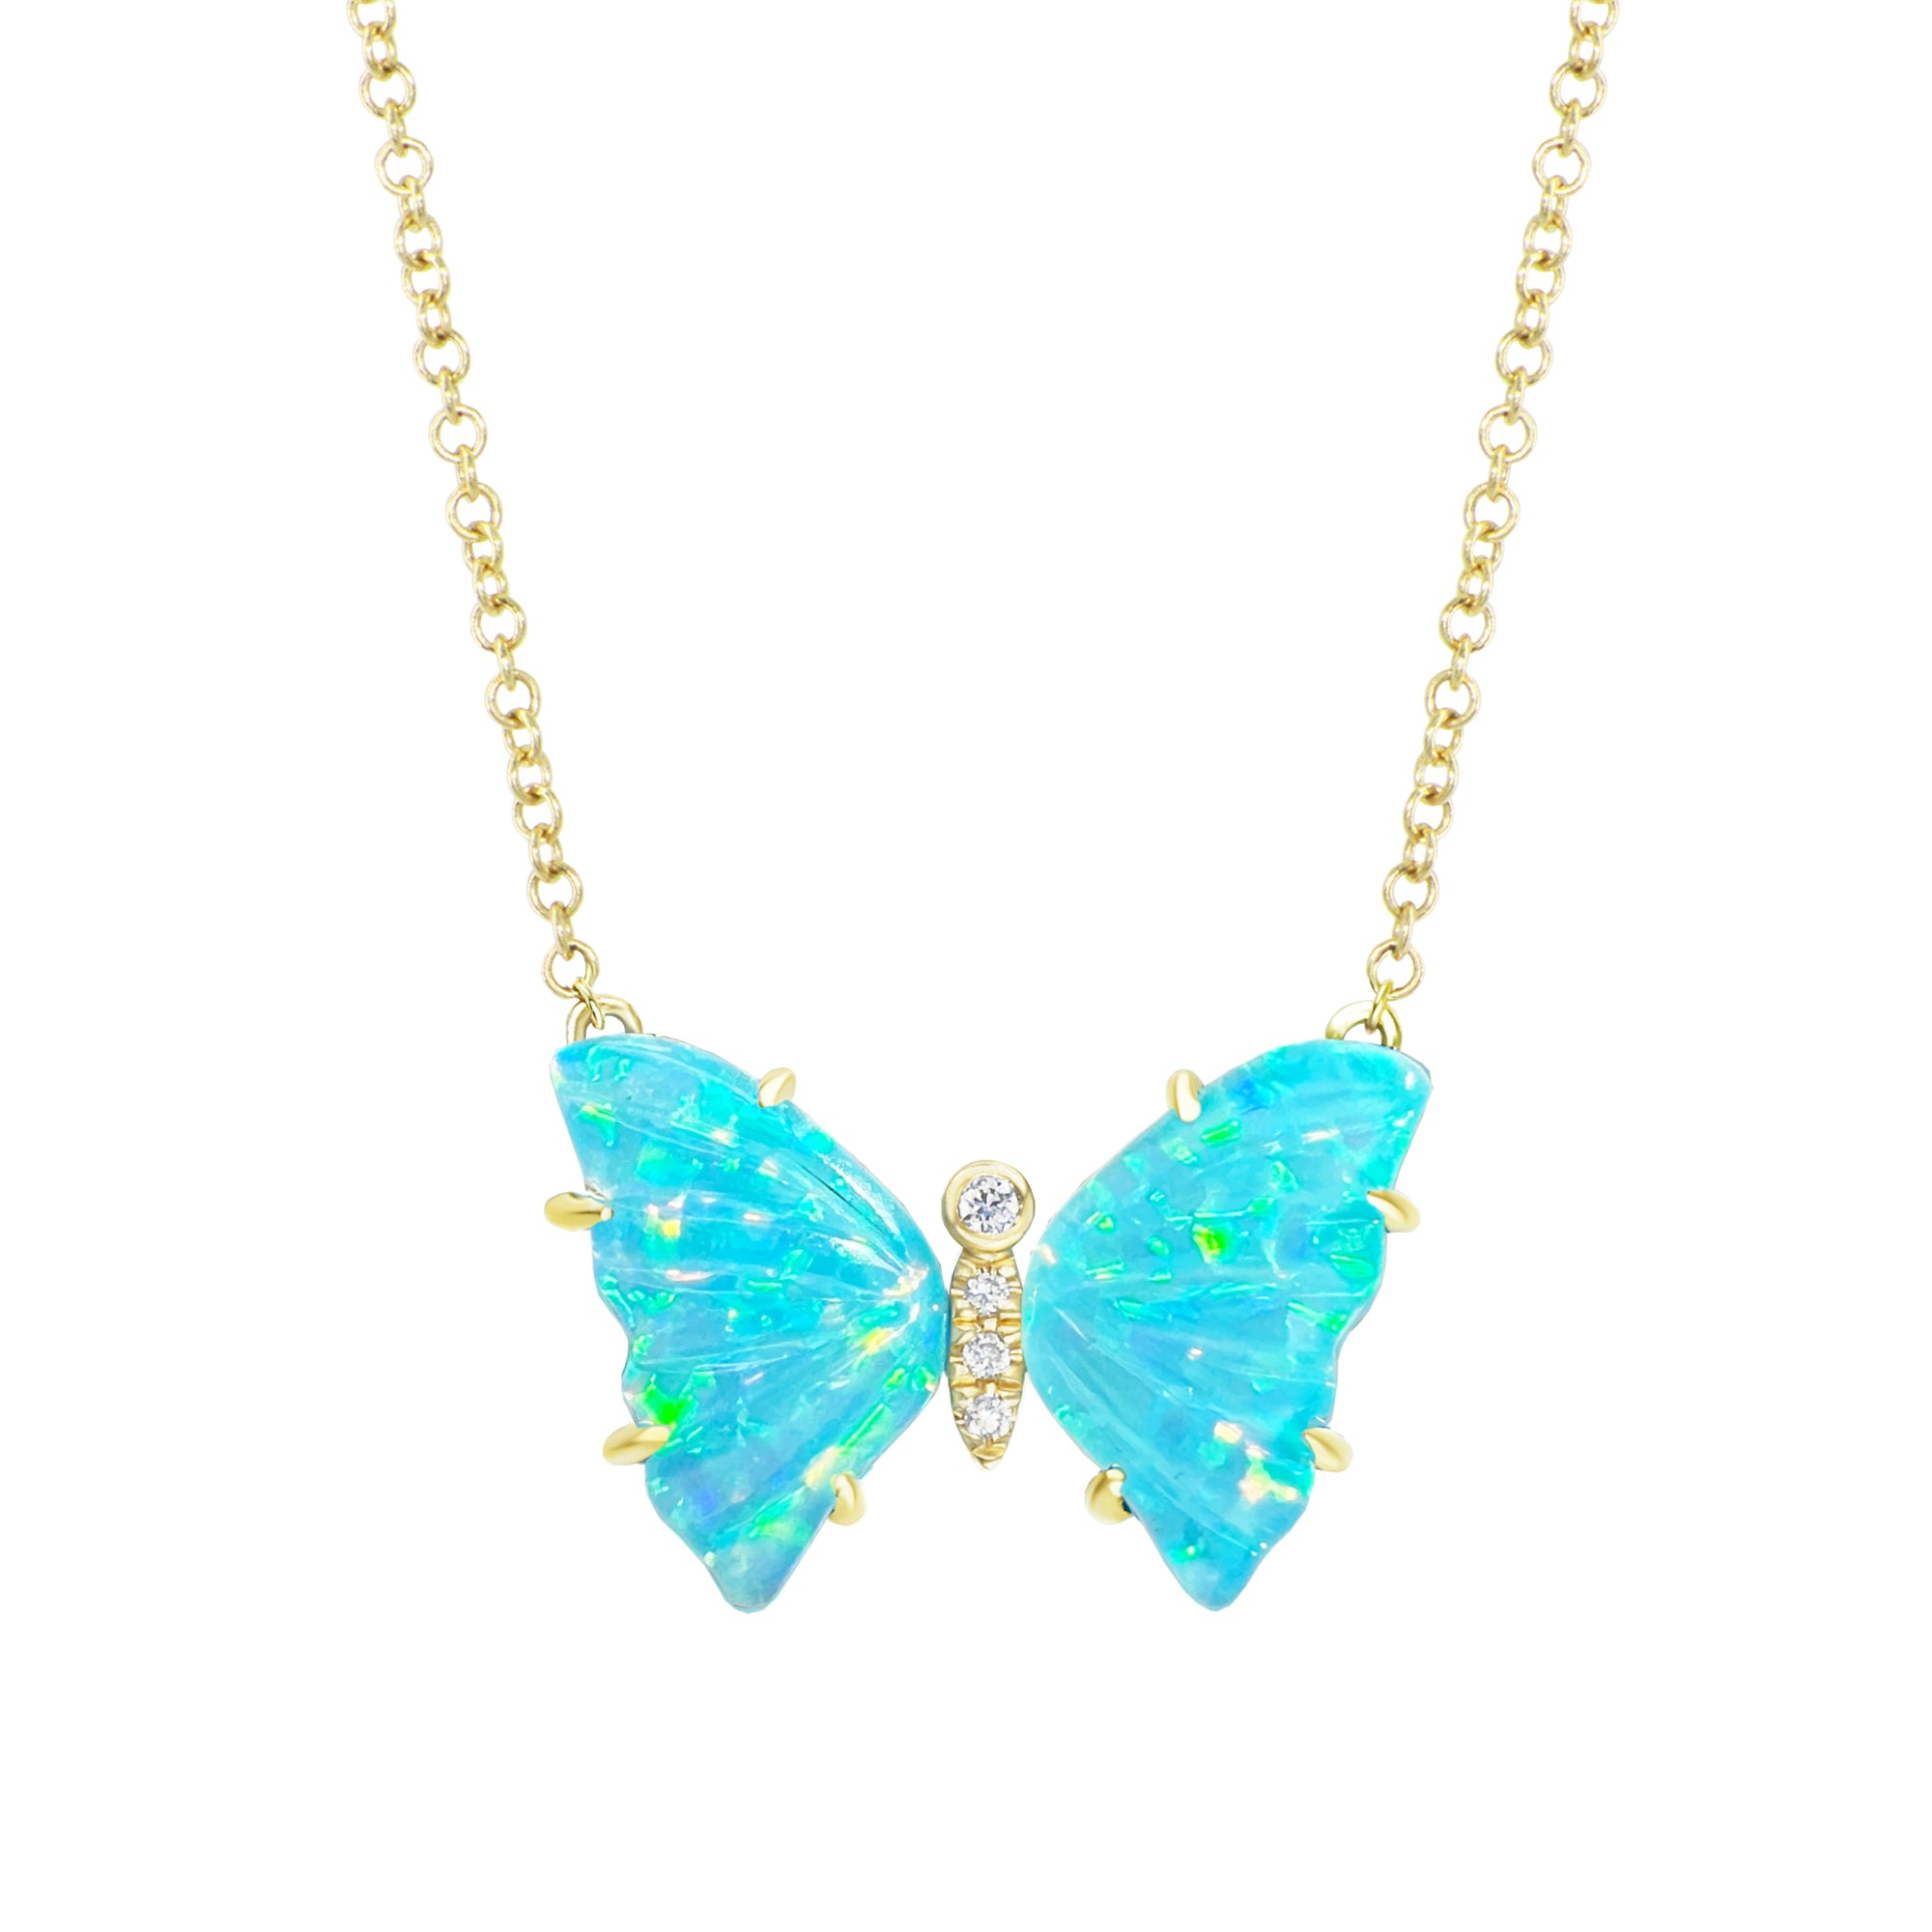 mini pronged butterfly necklace with diamonds in turquoise opal